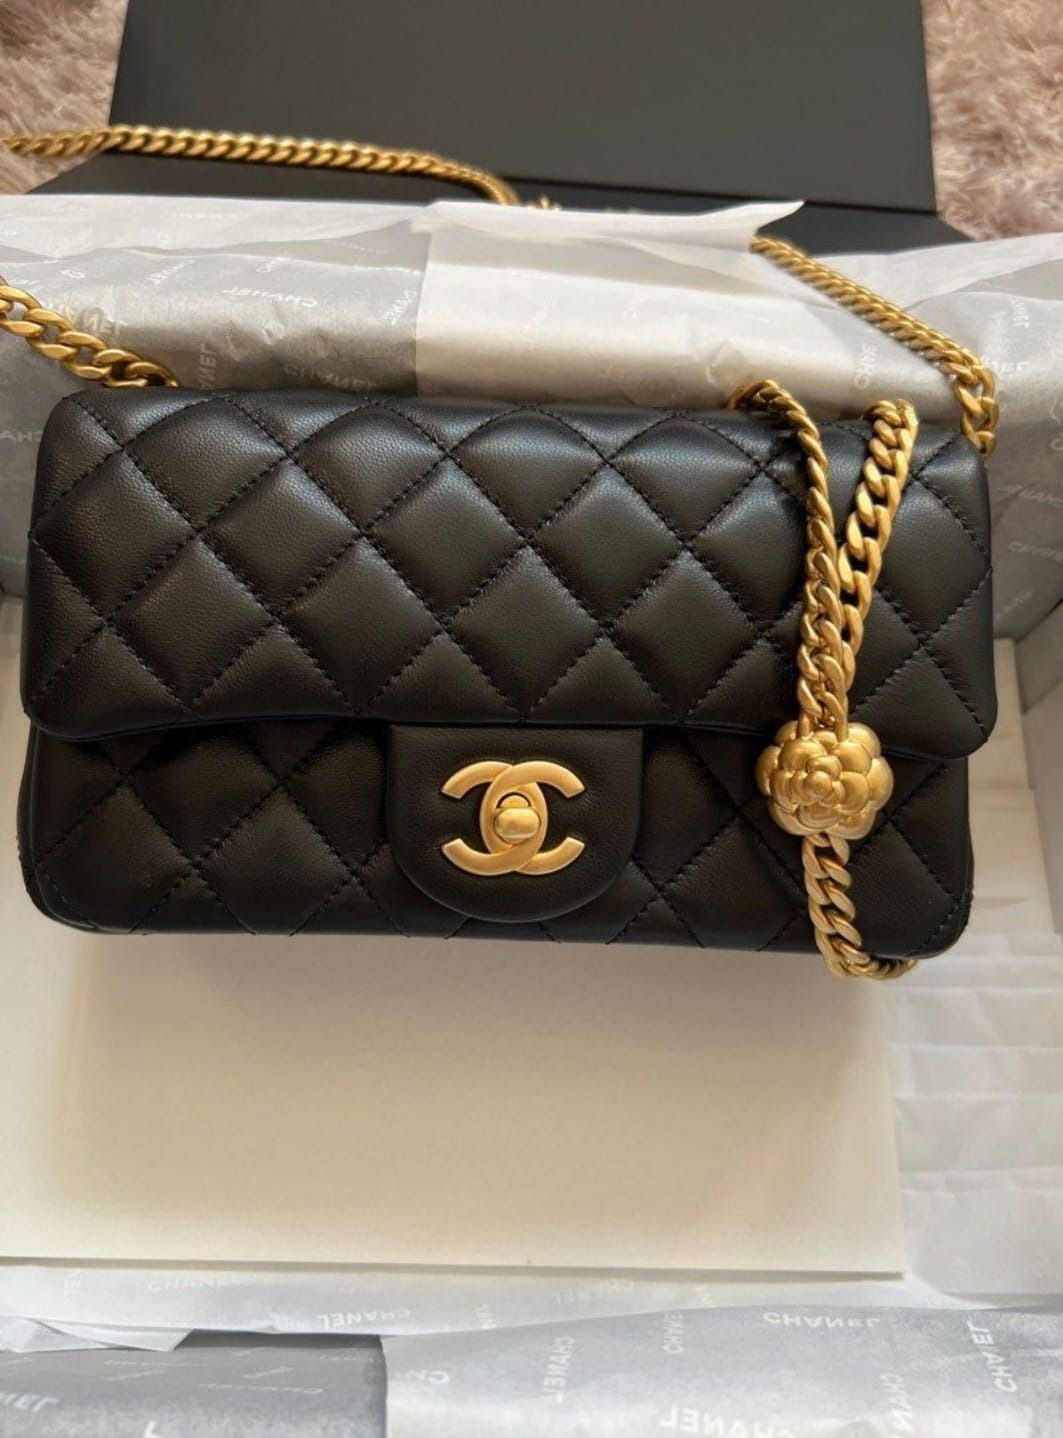 Chanel 23S Light Pink Rectangular Mini with Adjustable Camellia Chain